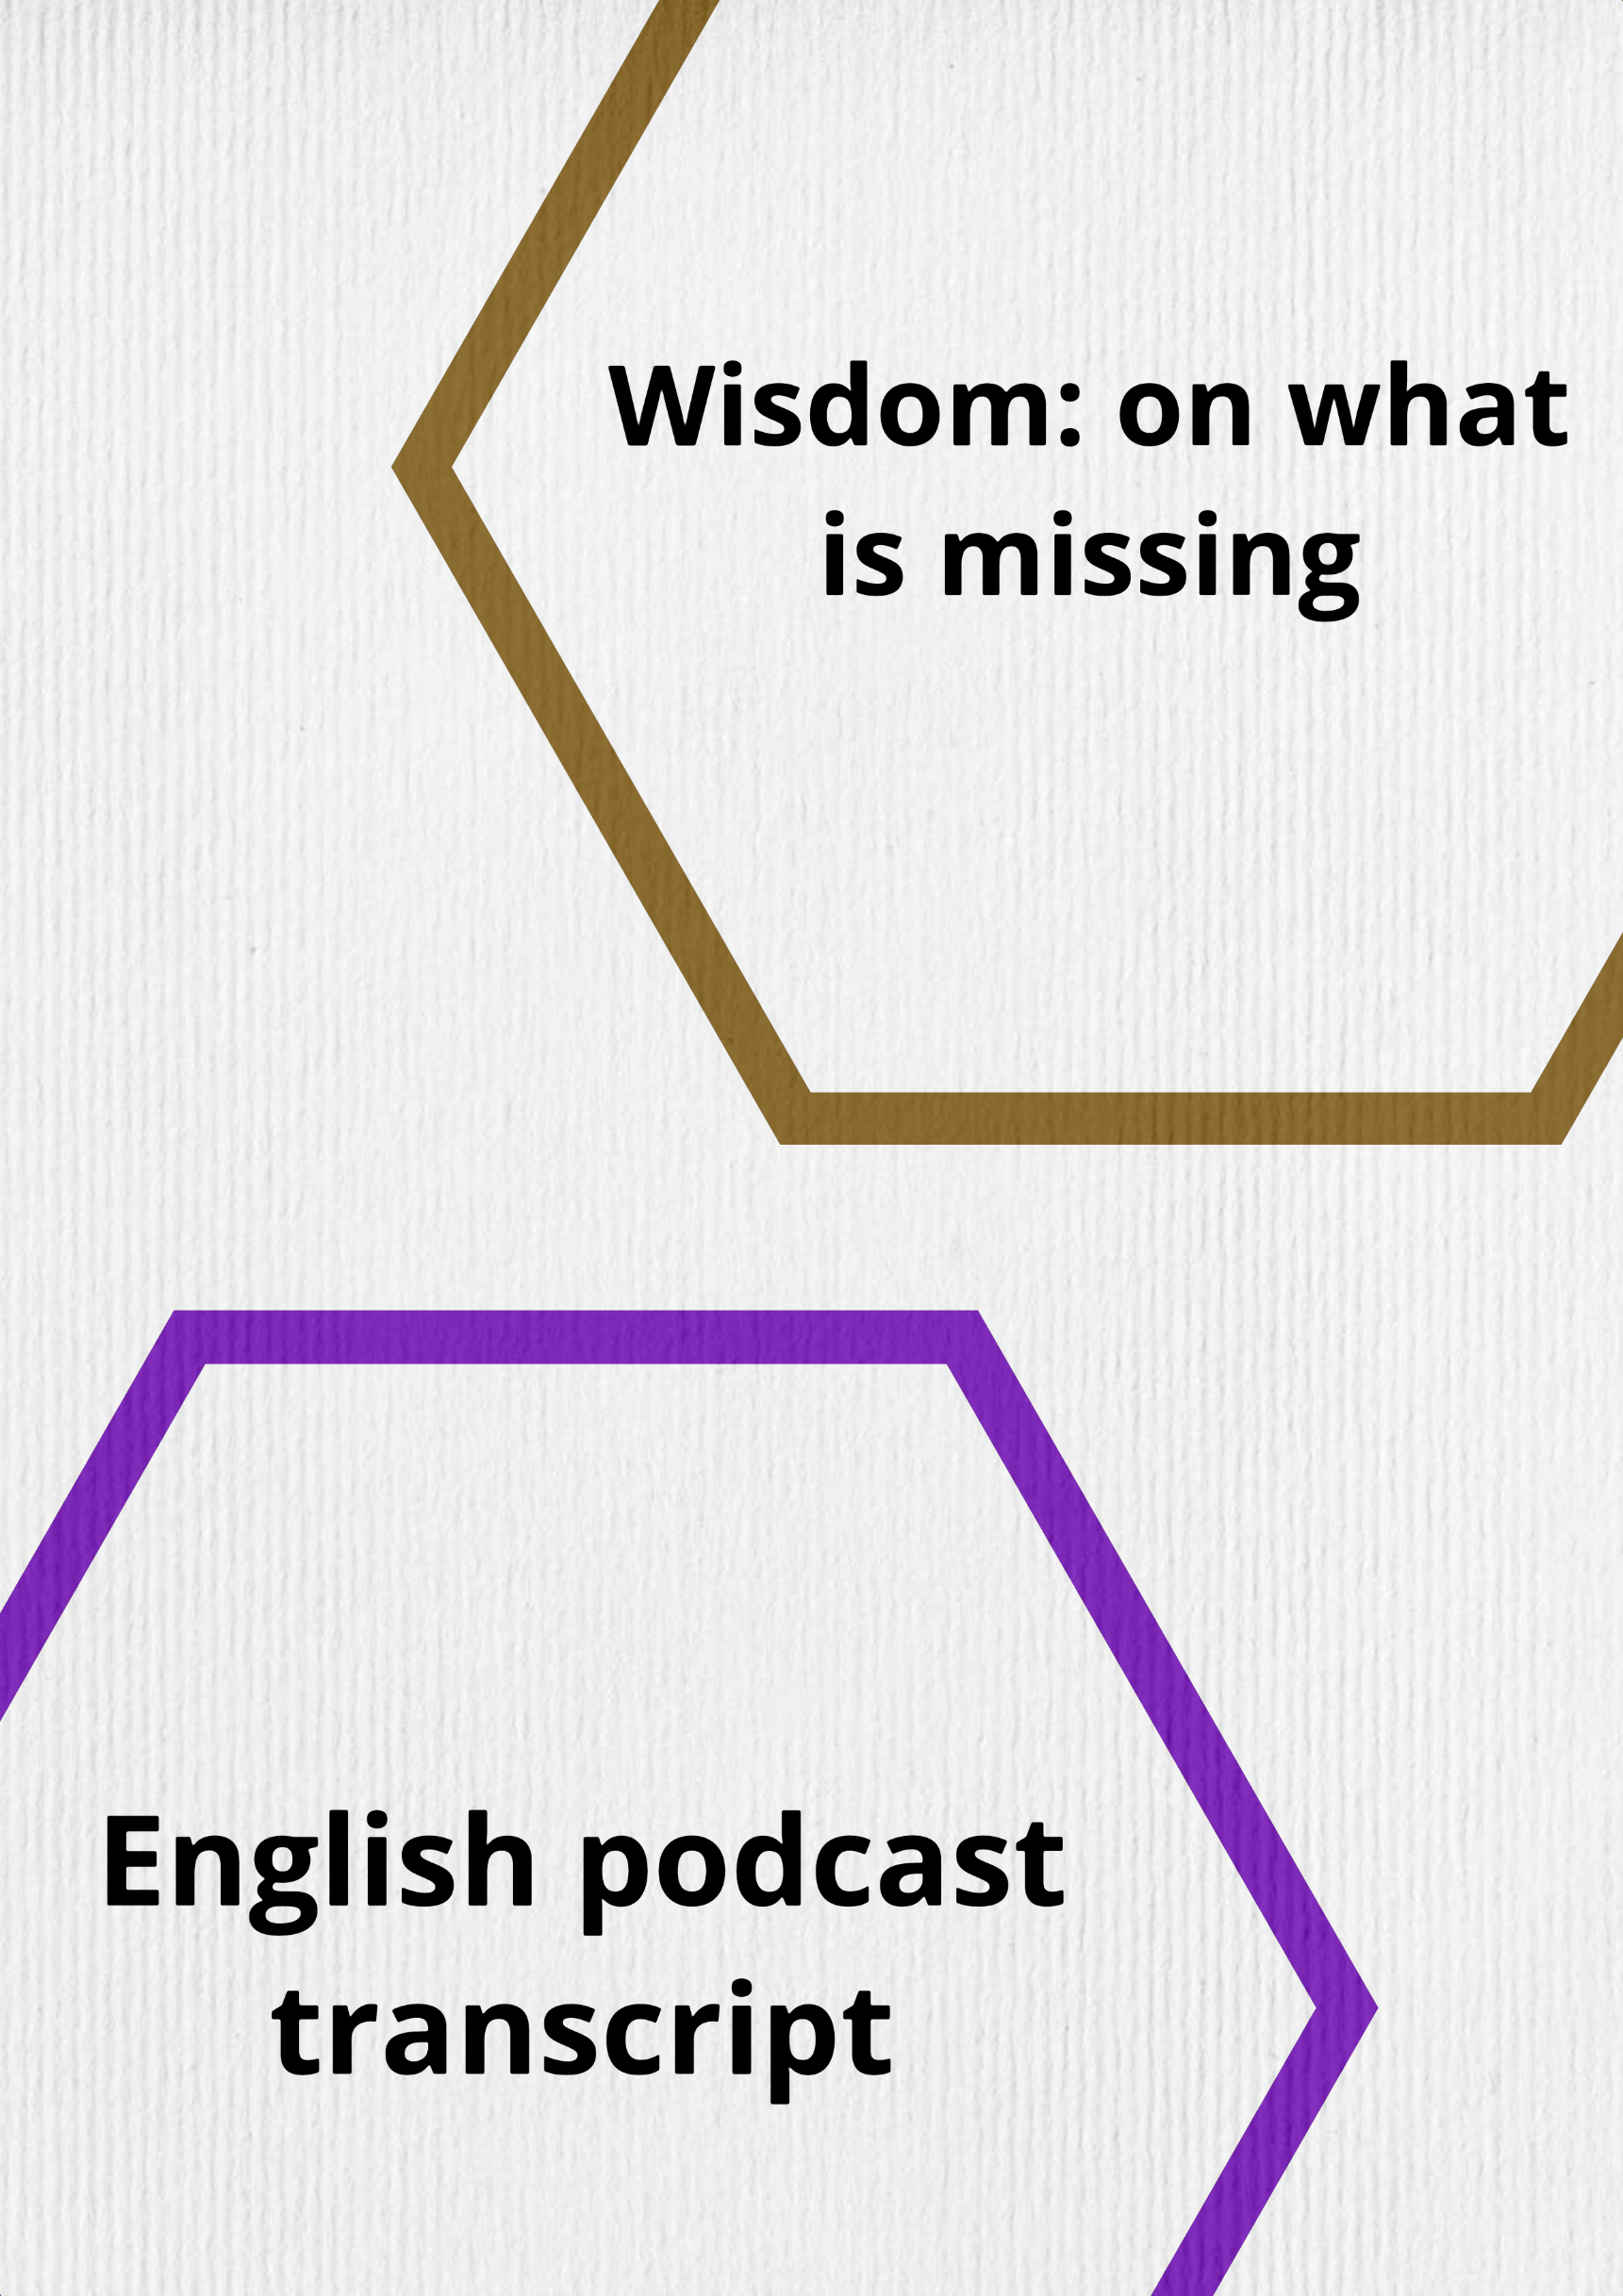 Wisdom: On what is missing